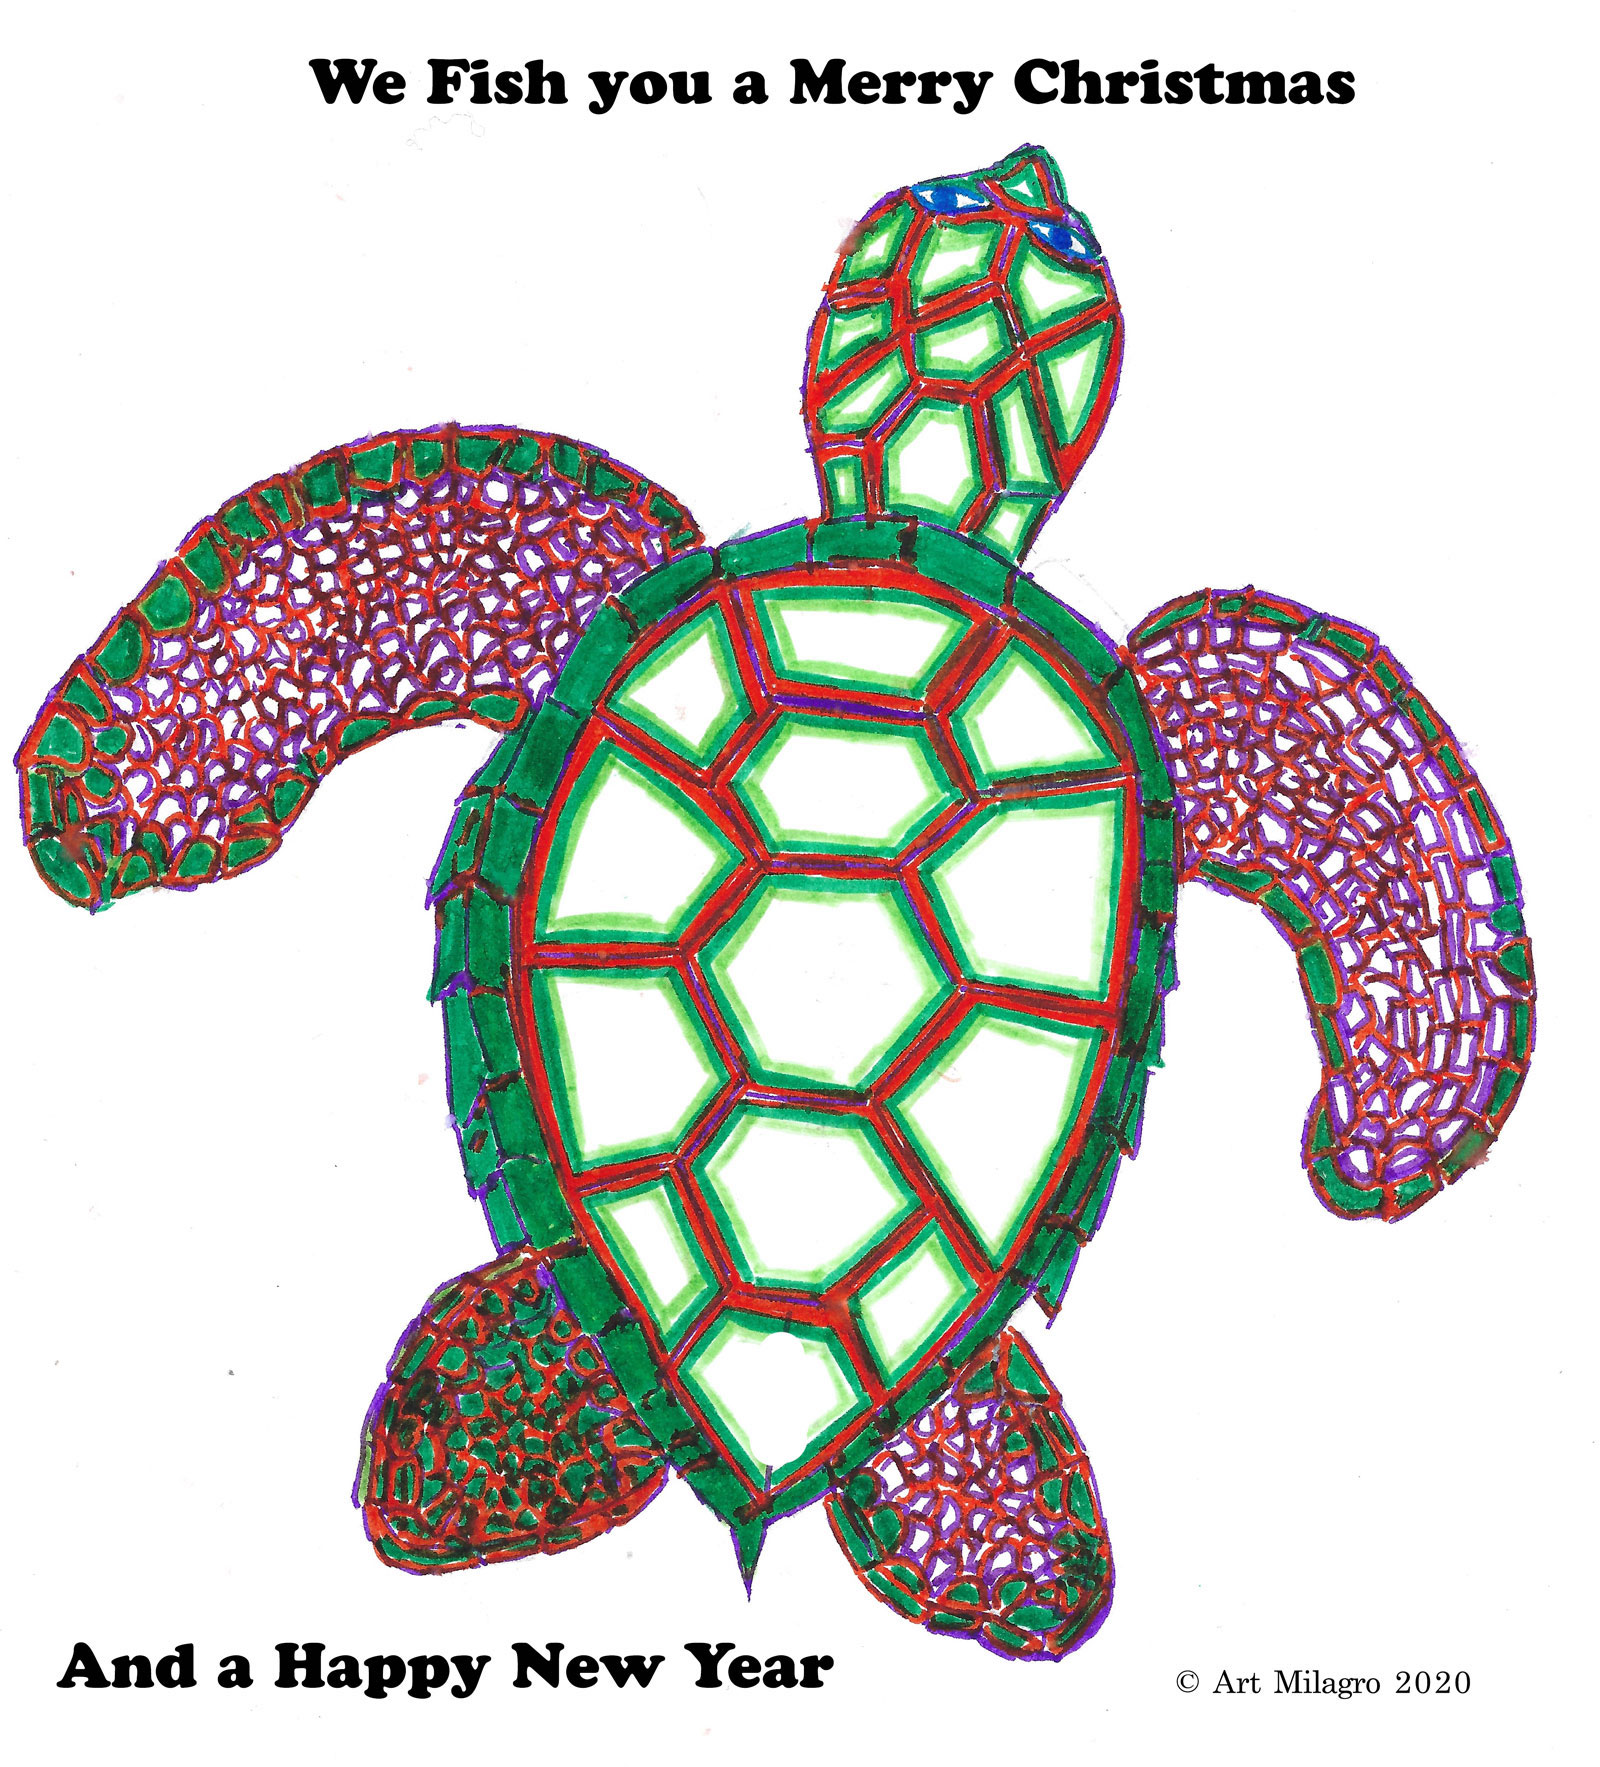 We Wish You a Merry Christmas Blue Eyed Sea Turtle